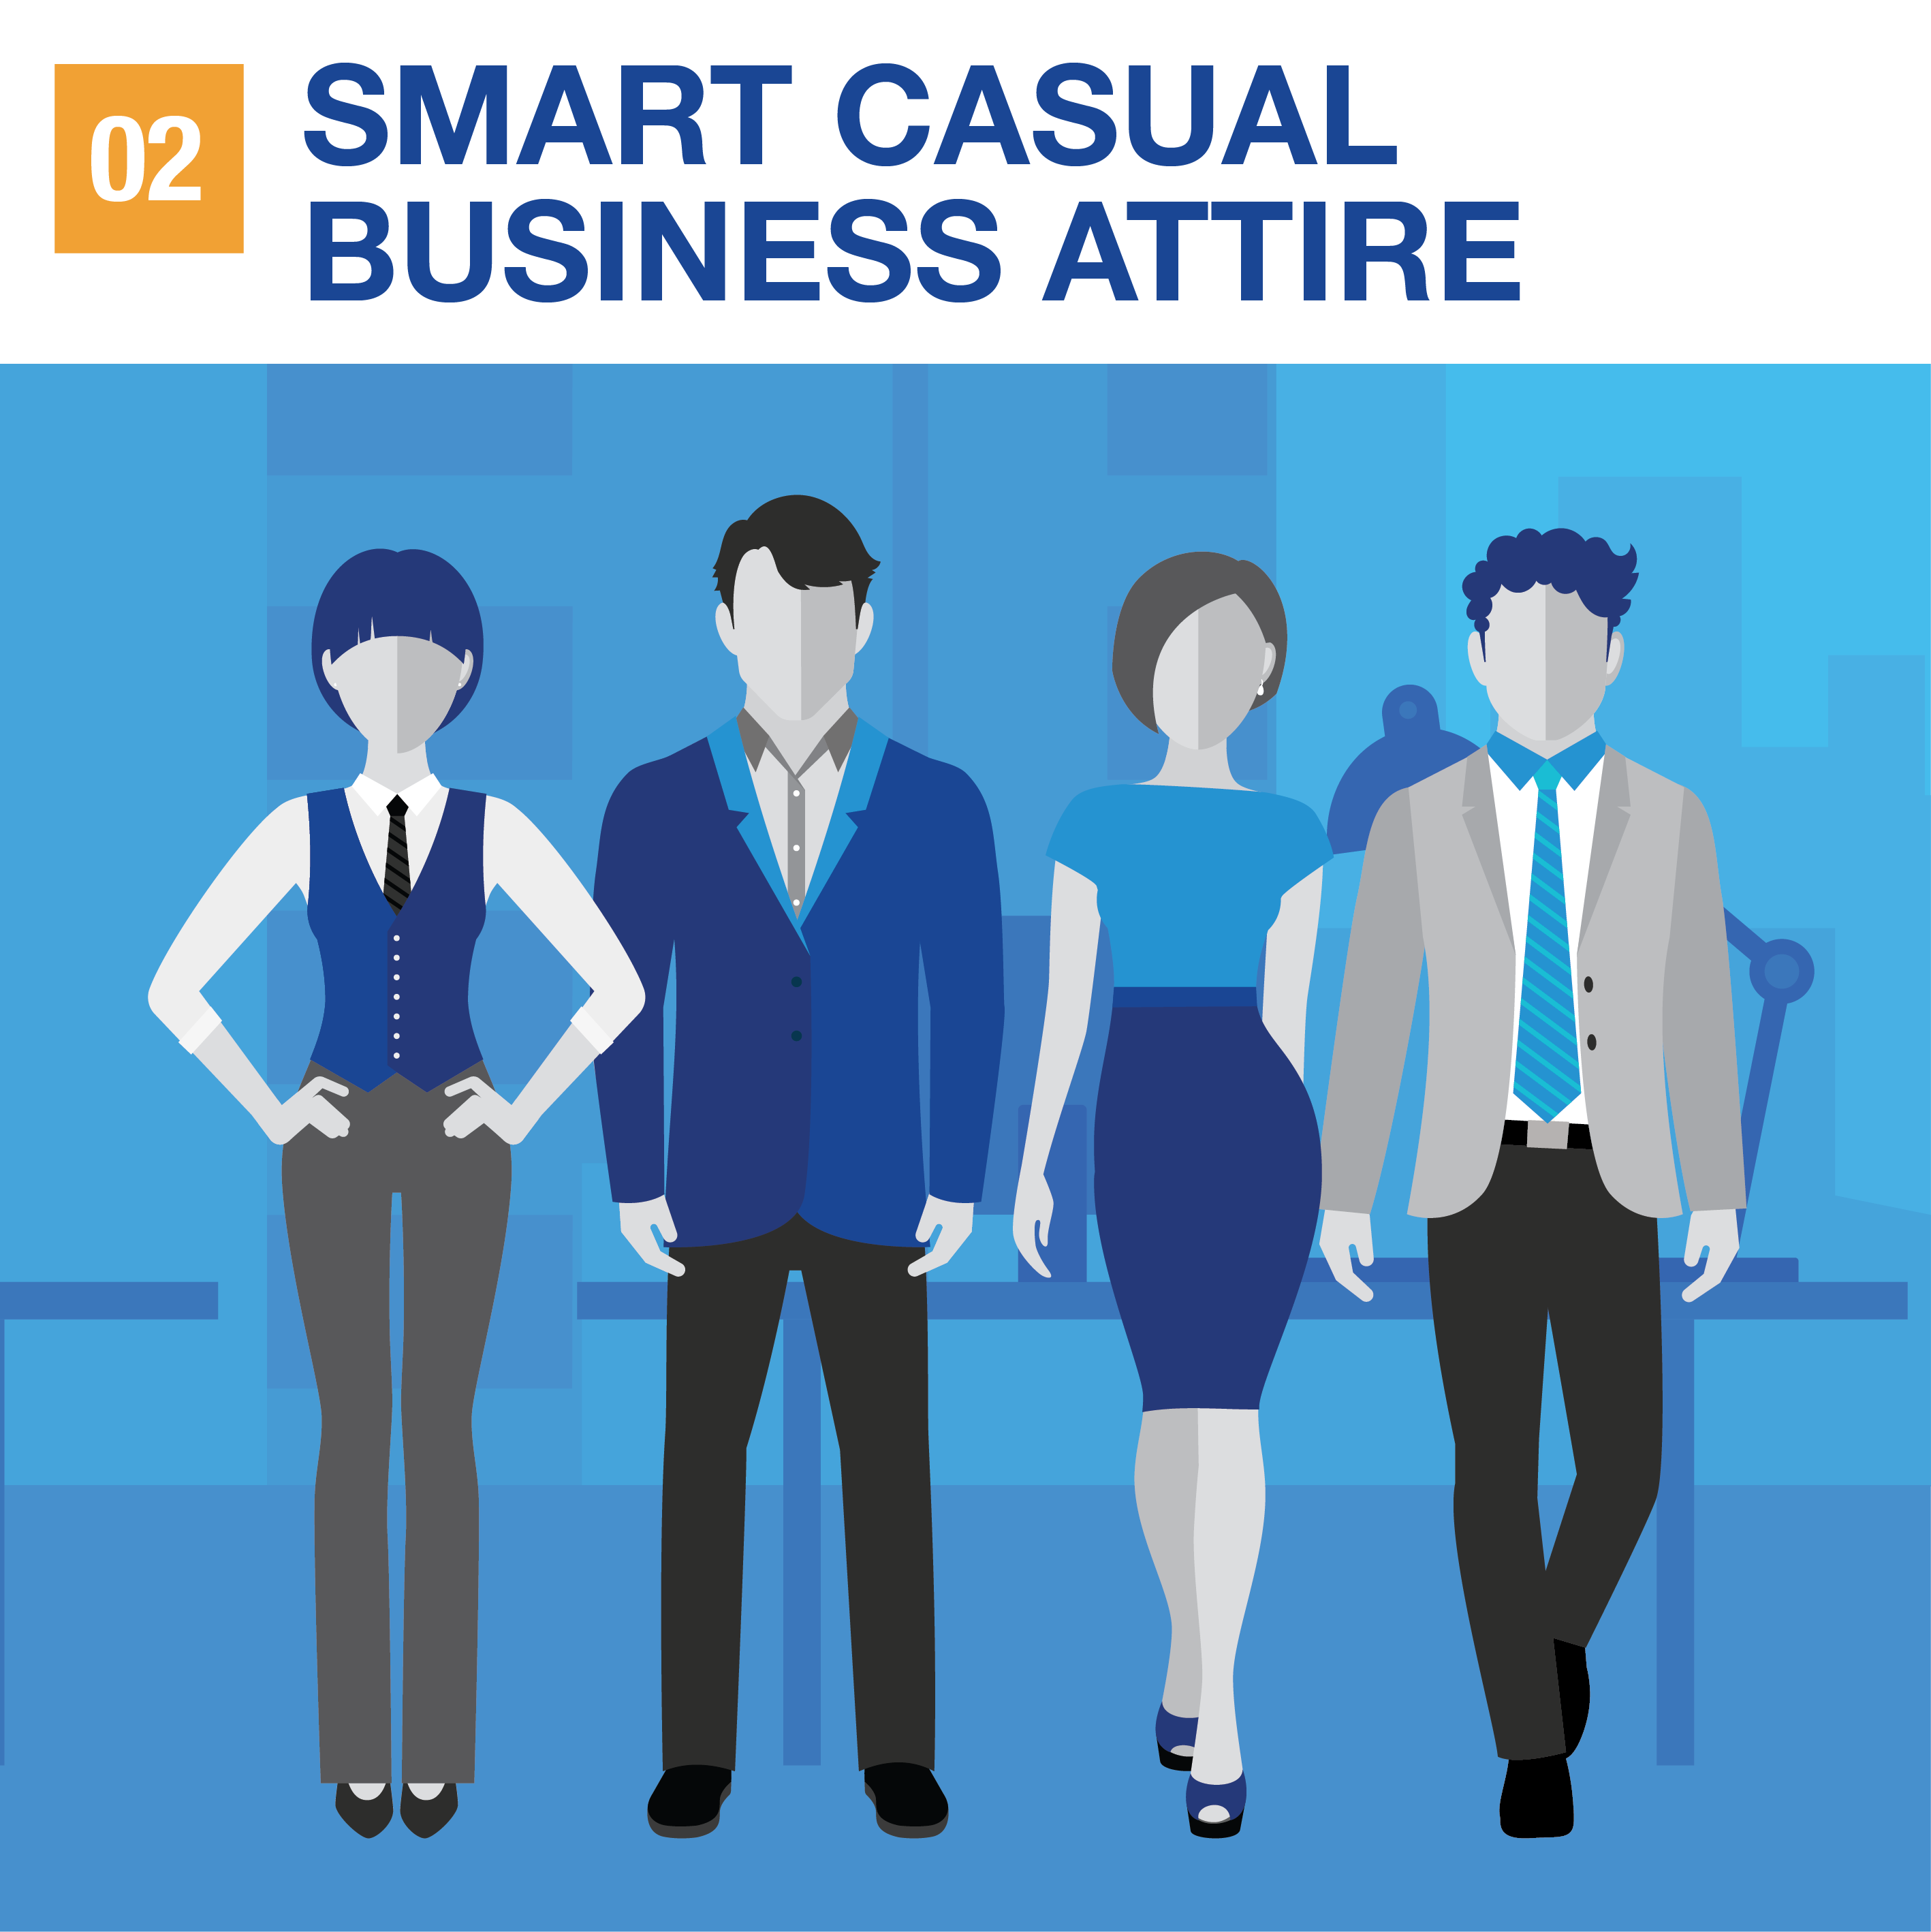 Different types of business attire | Michael Page Australia